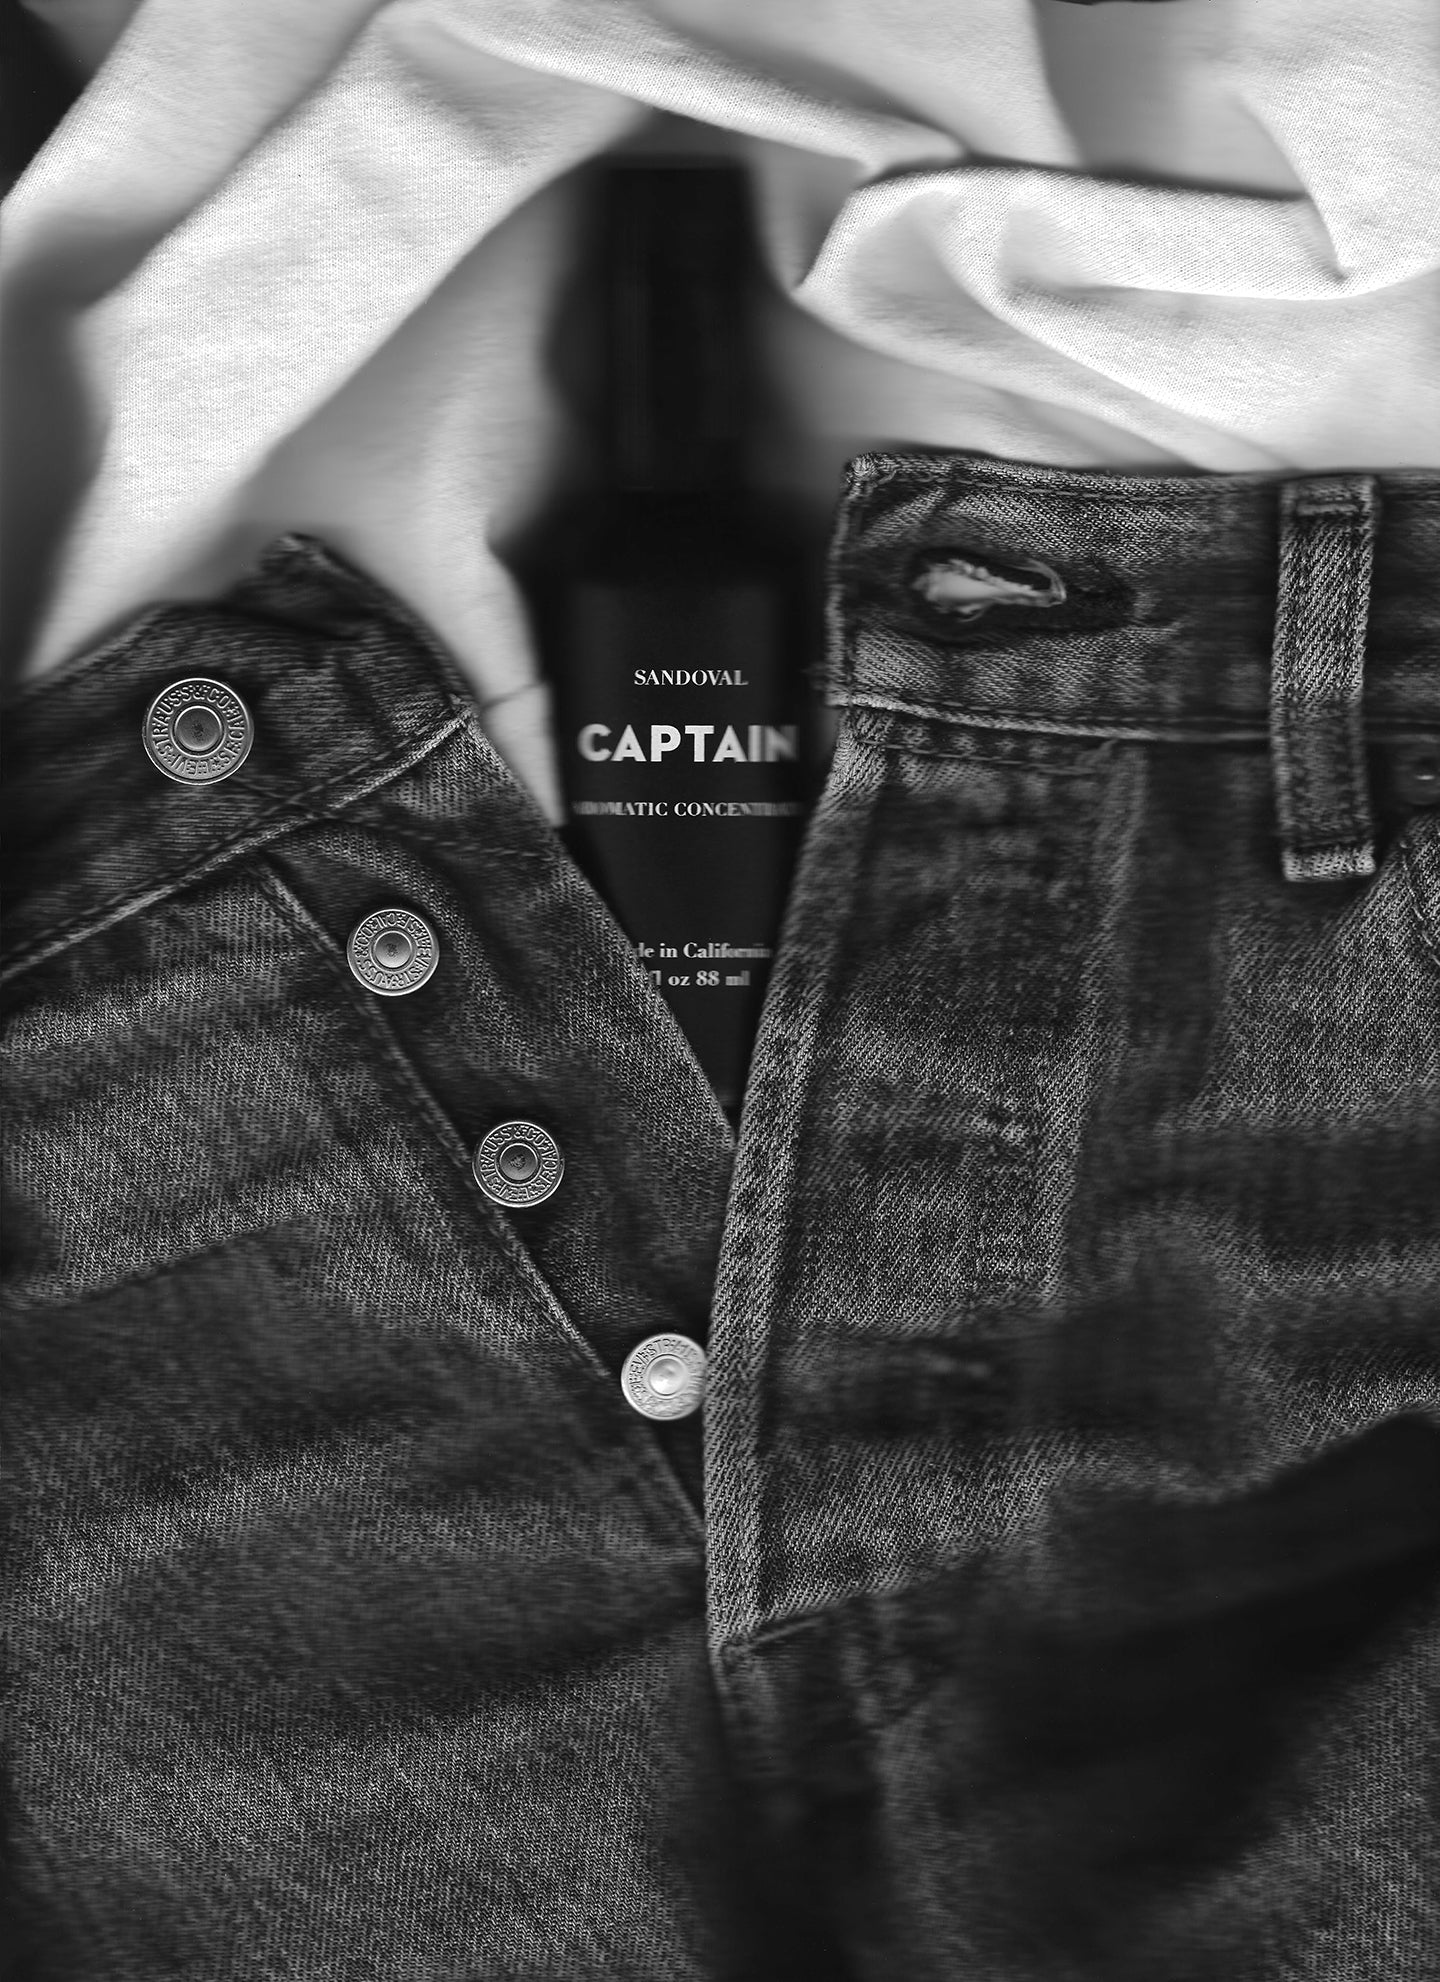 Image of someone's jeans unbuttoned with Captain aromatic concentrate bottle tucked in the crotch. Our nod to the sensual nature of all natural scents derived from essential oils. 